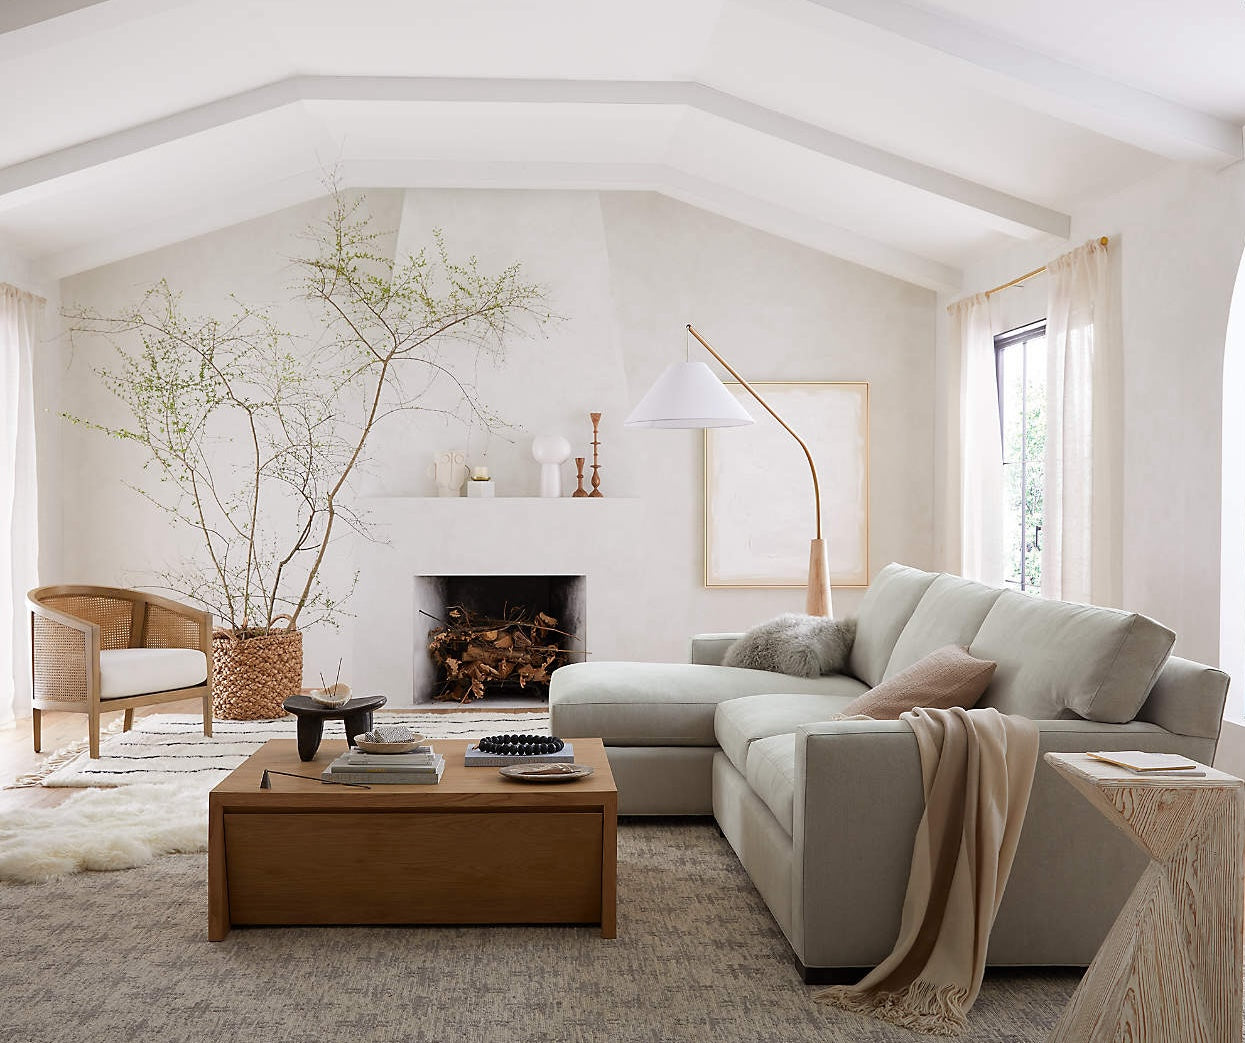 A bright, minimalist living room with a vaulted ceiling features a light gray sectional sofa, a wooden coffee table, and a fireplace. A slender floor lamp and a tall potted plant add decorative touches. Large windows with light curtains allow natural light to fill the room.